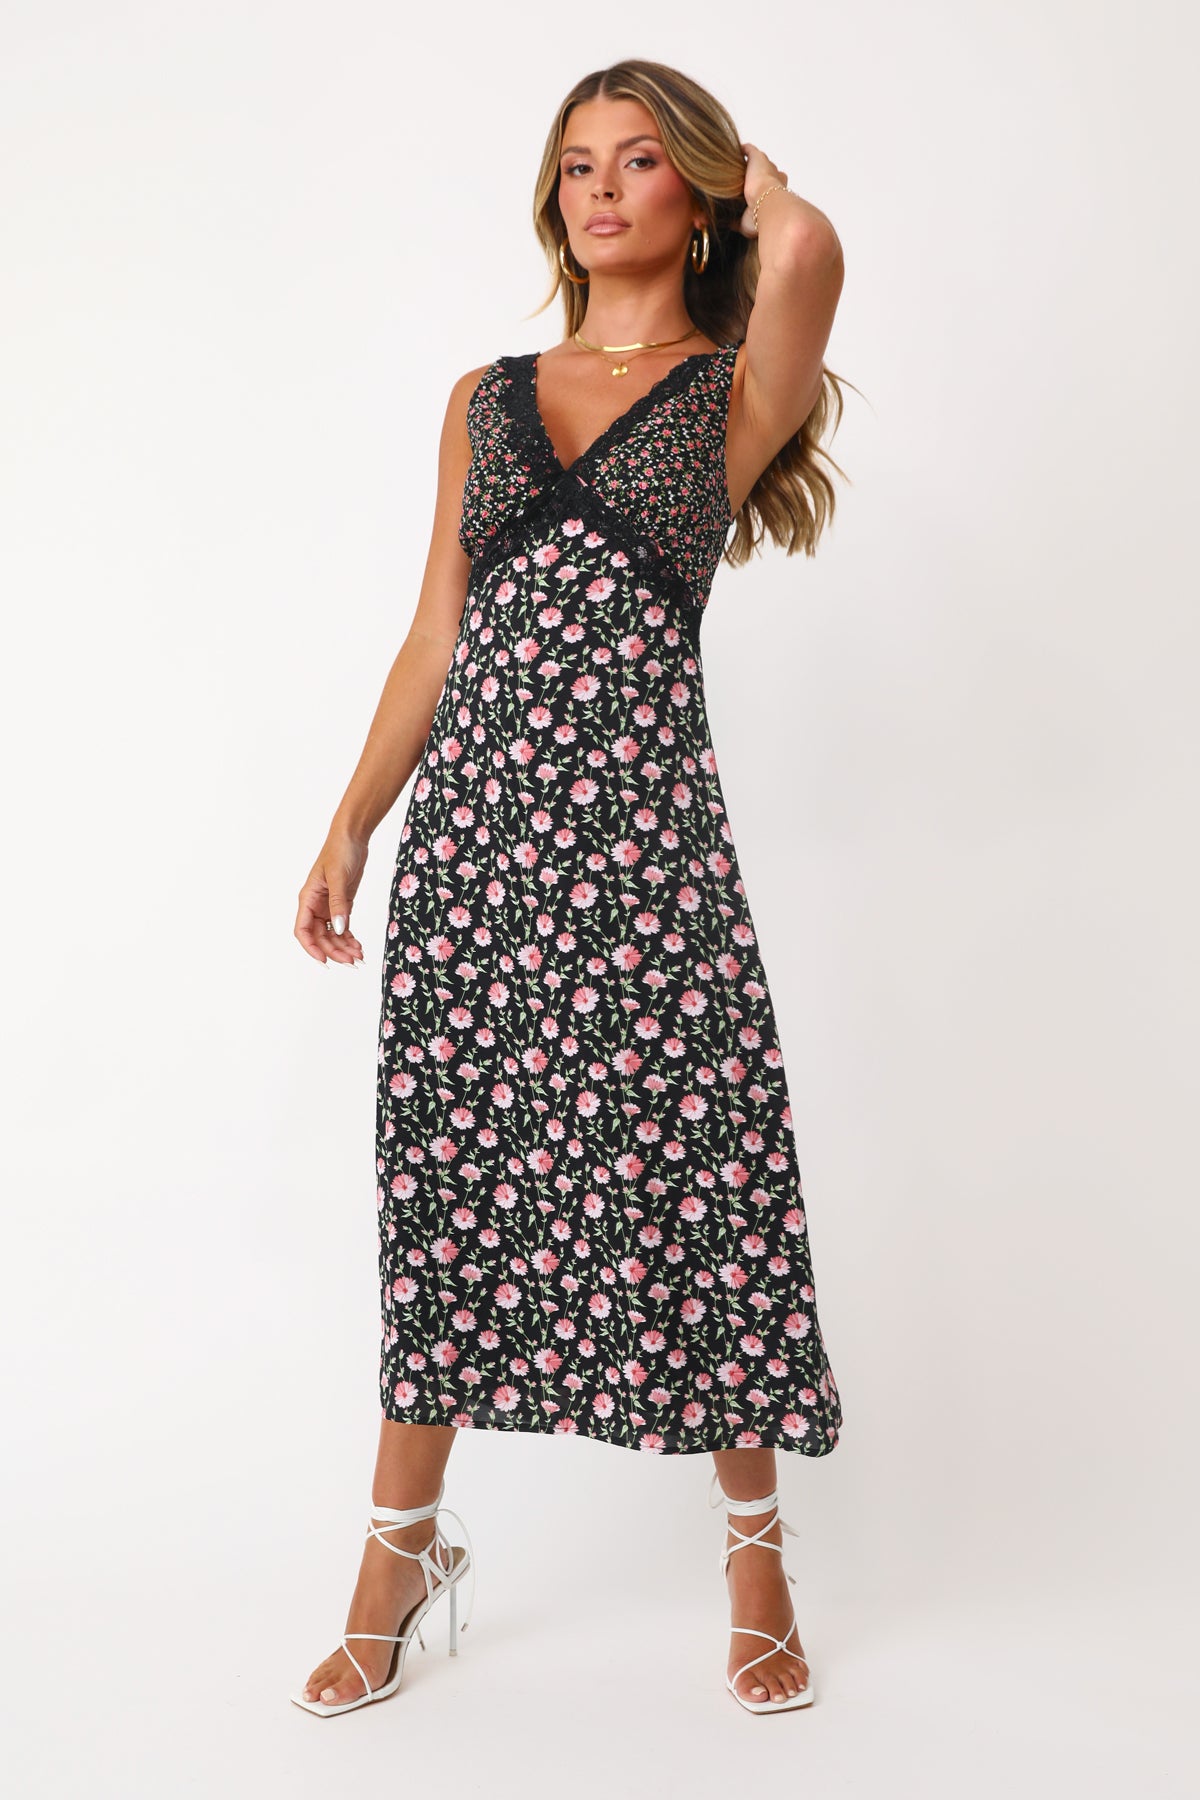 Model wearing the Summer Nights floral dress